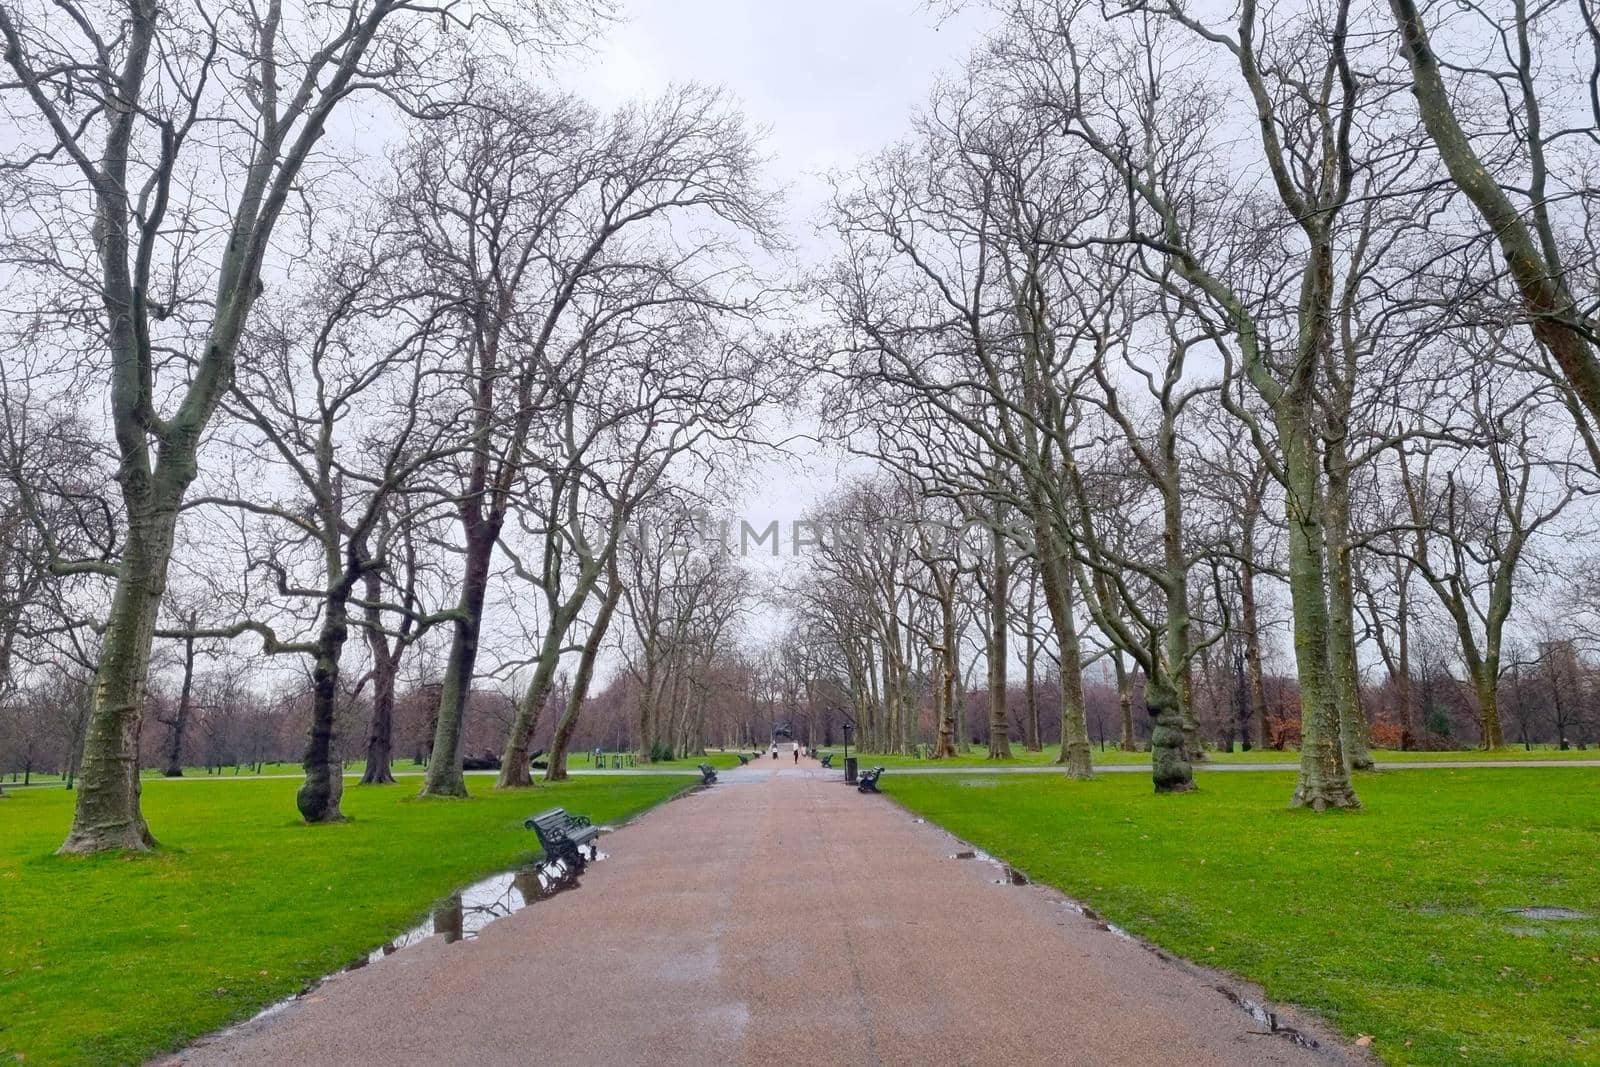 View of the park on a cloudy winter day. Outdoor recreation